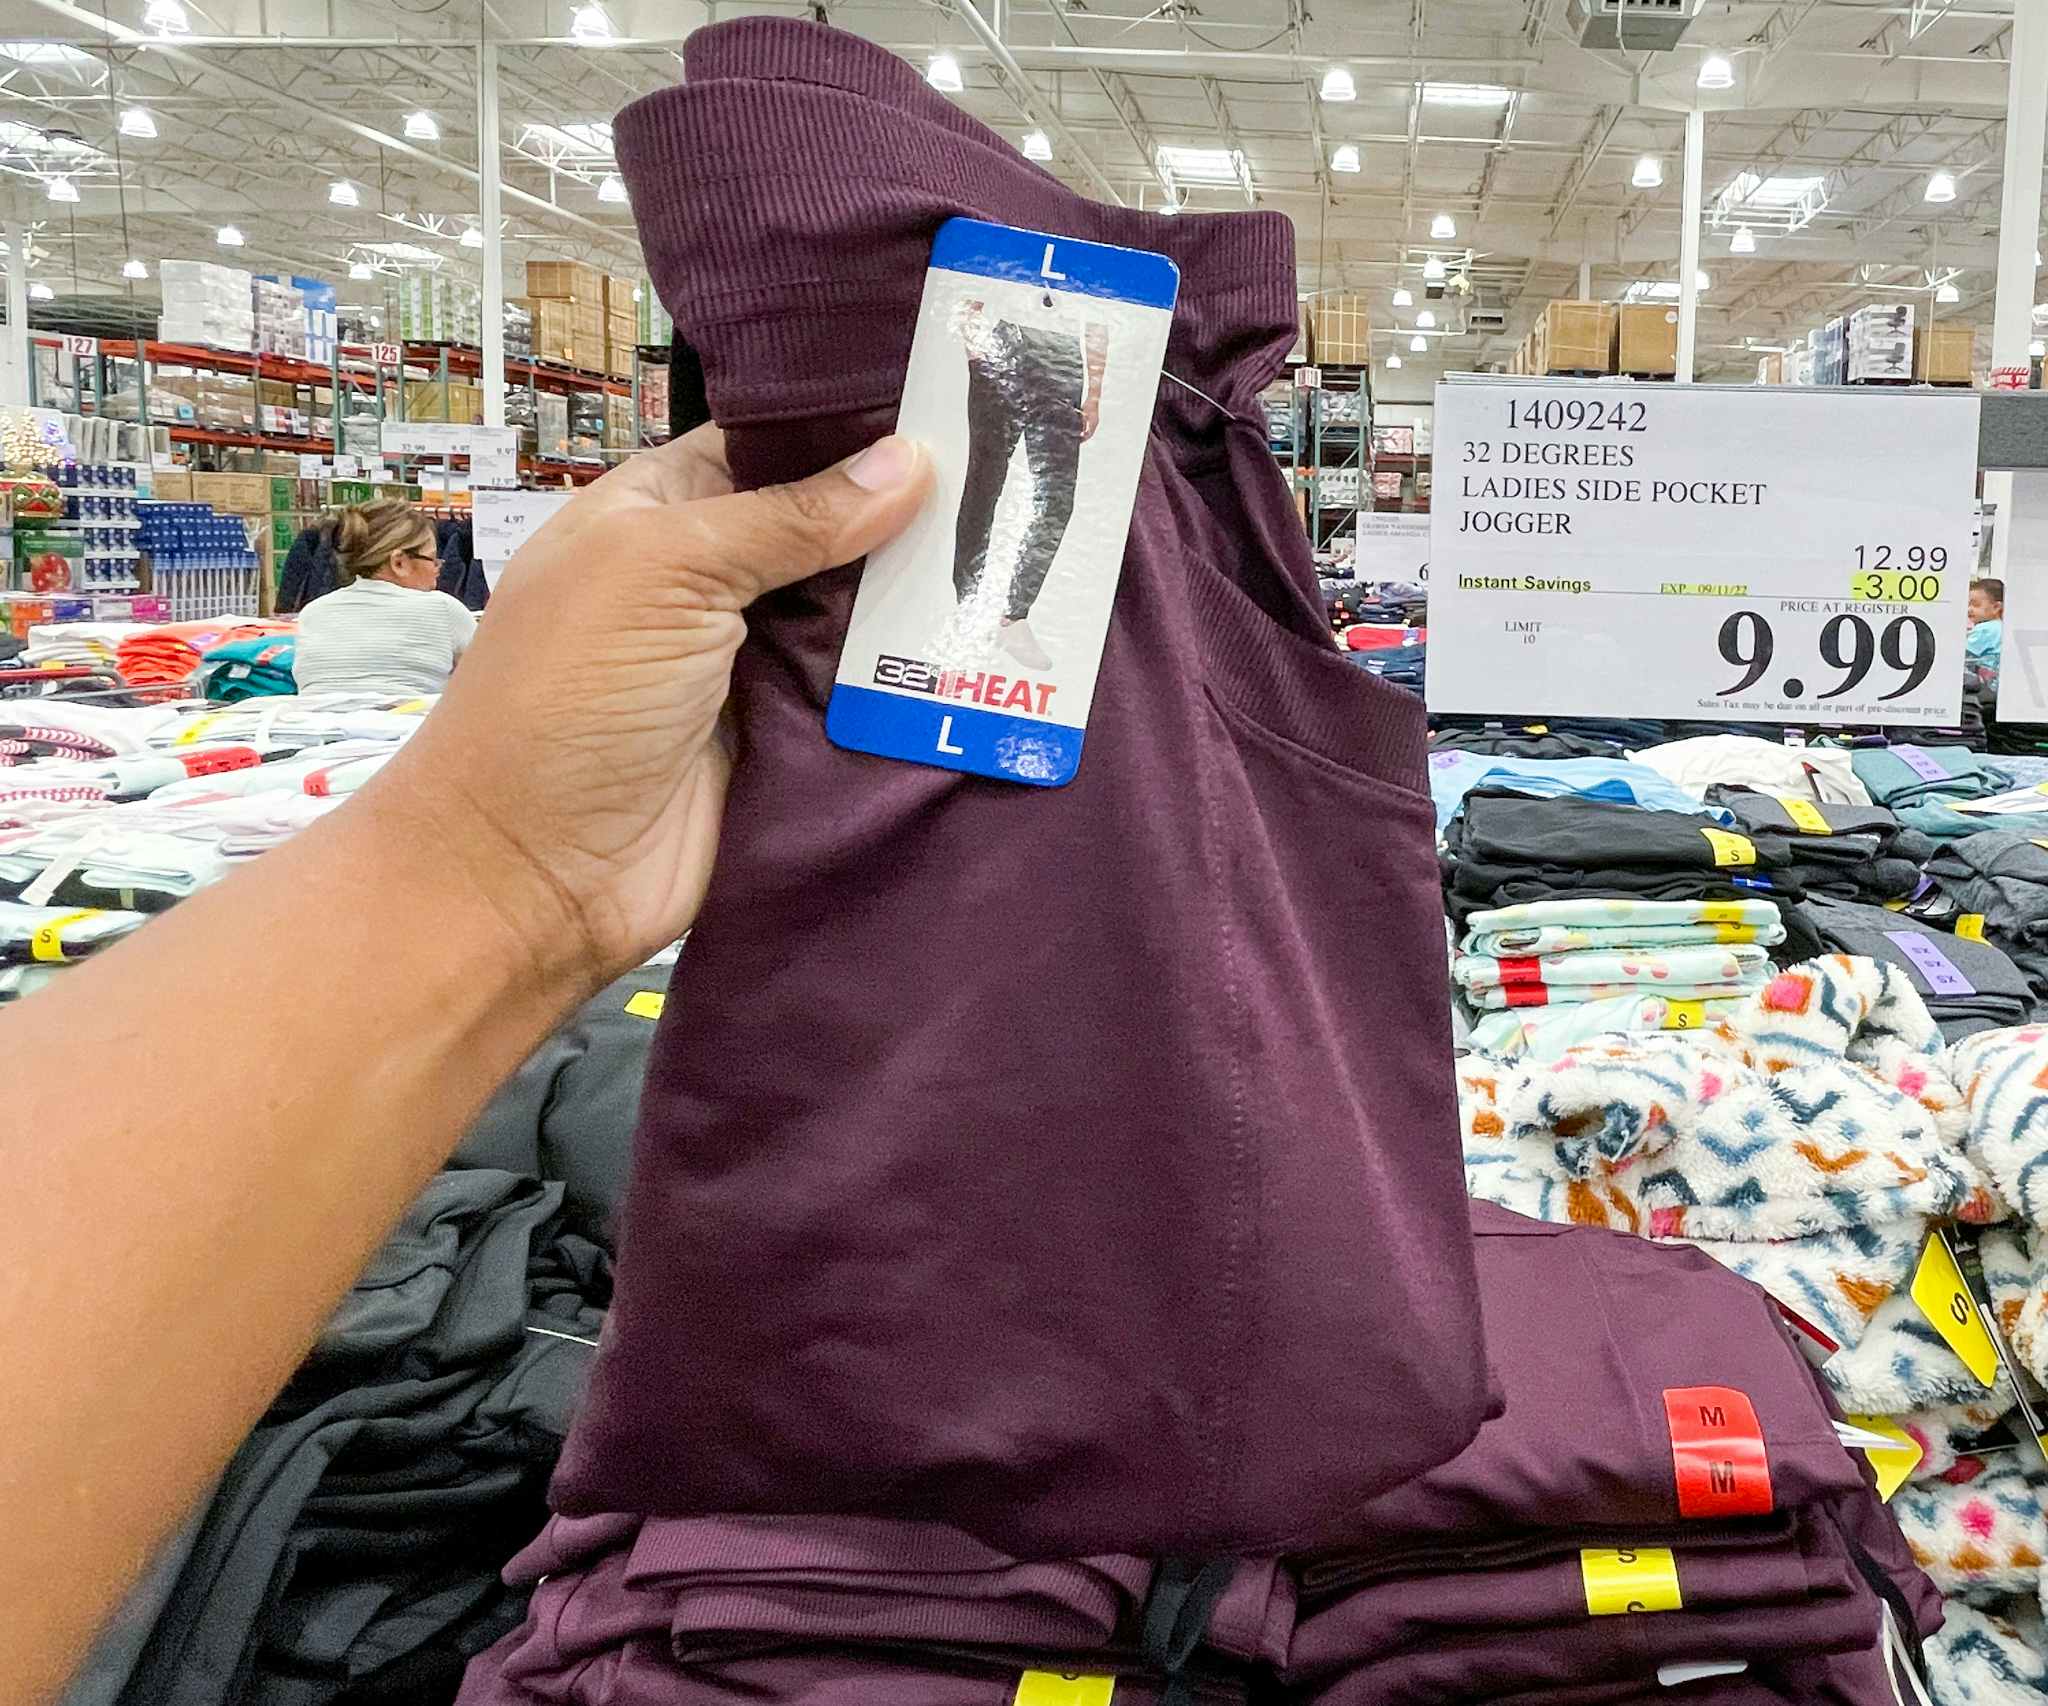 jogger hand held near sale sign at costco